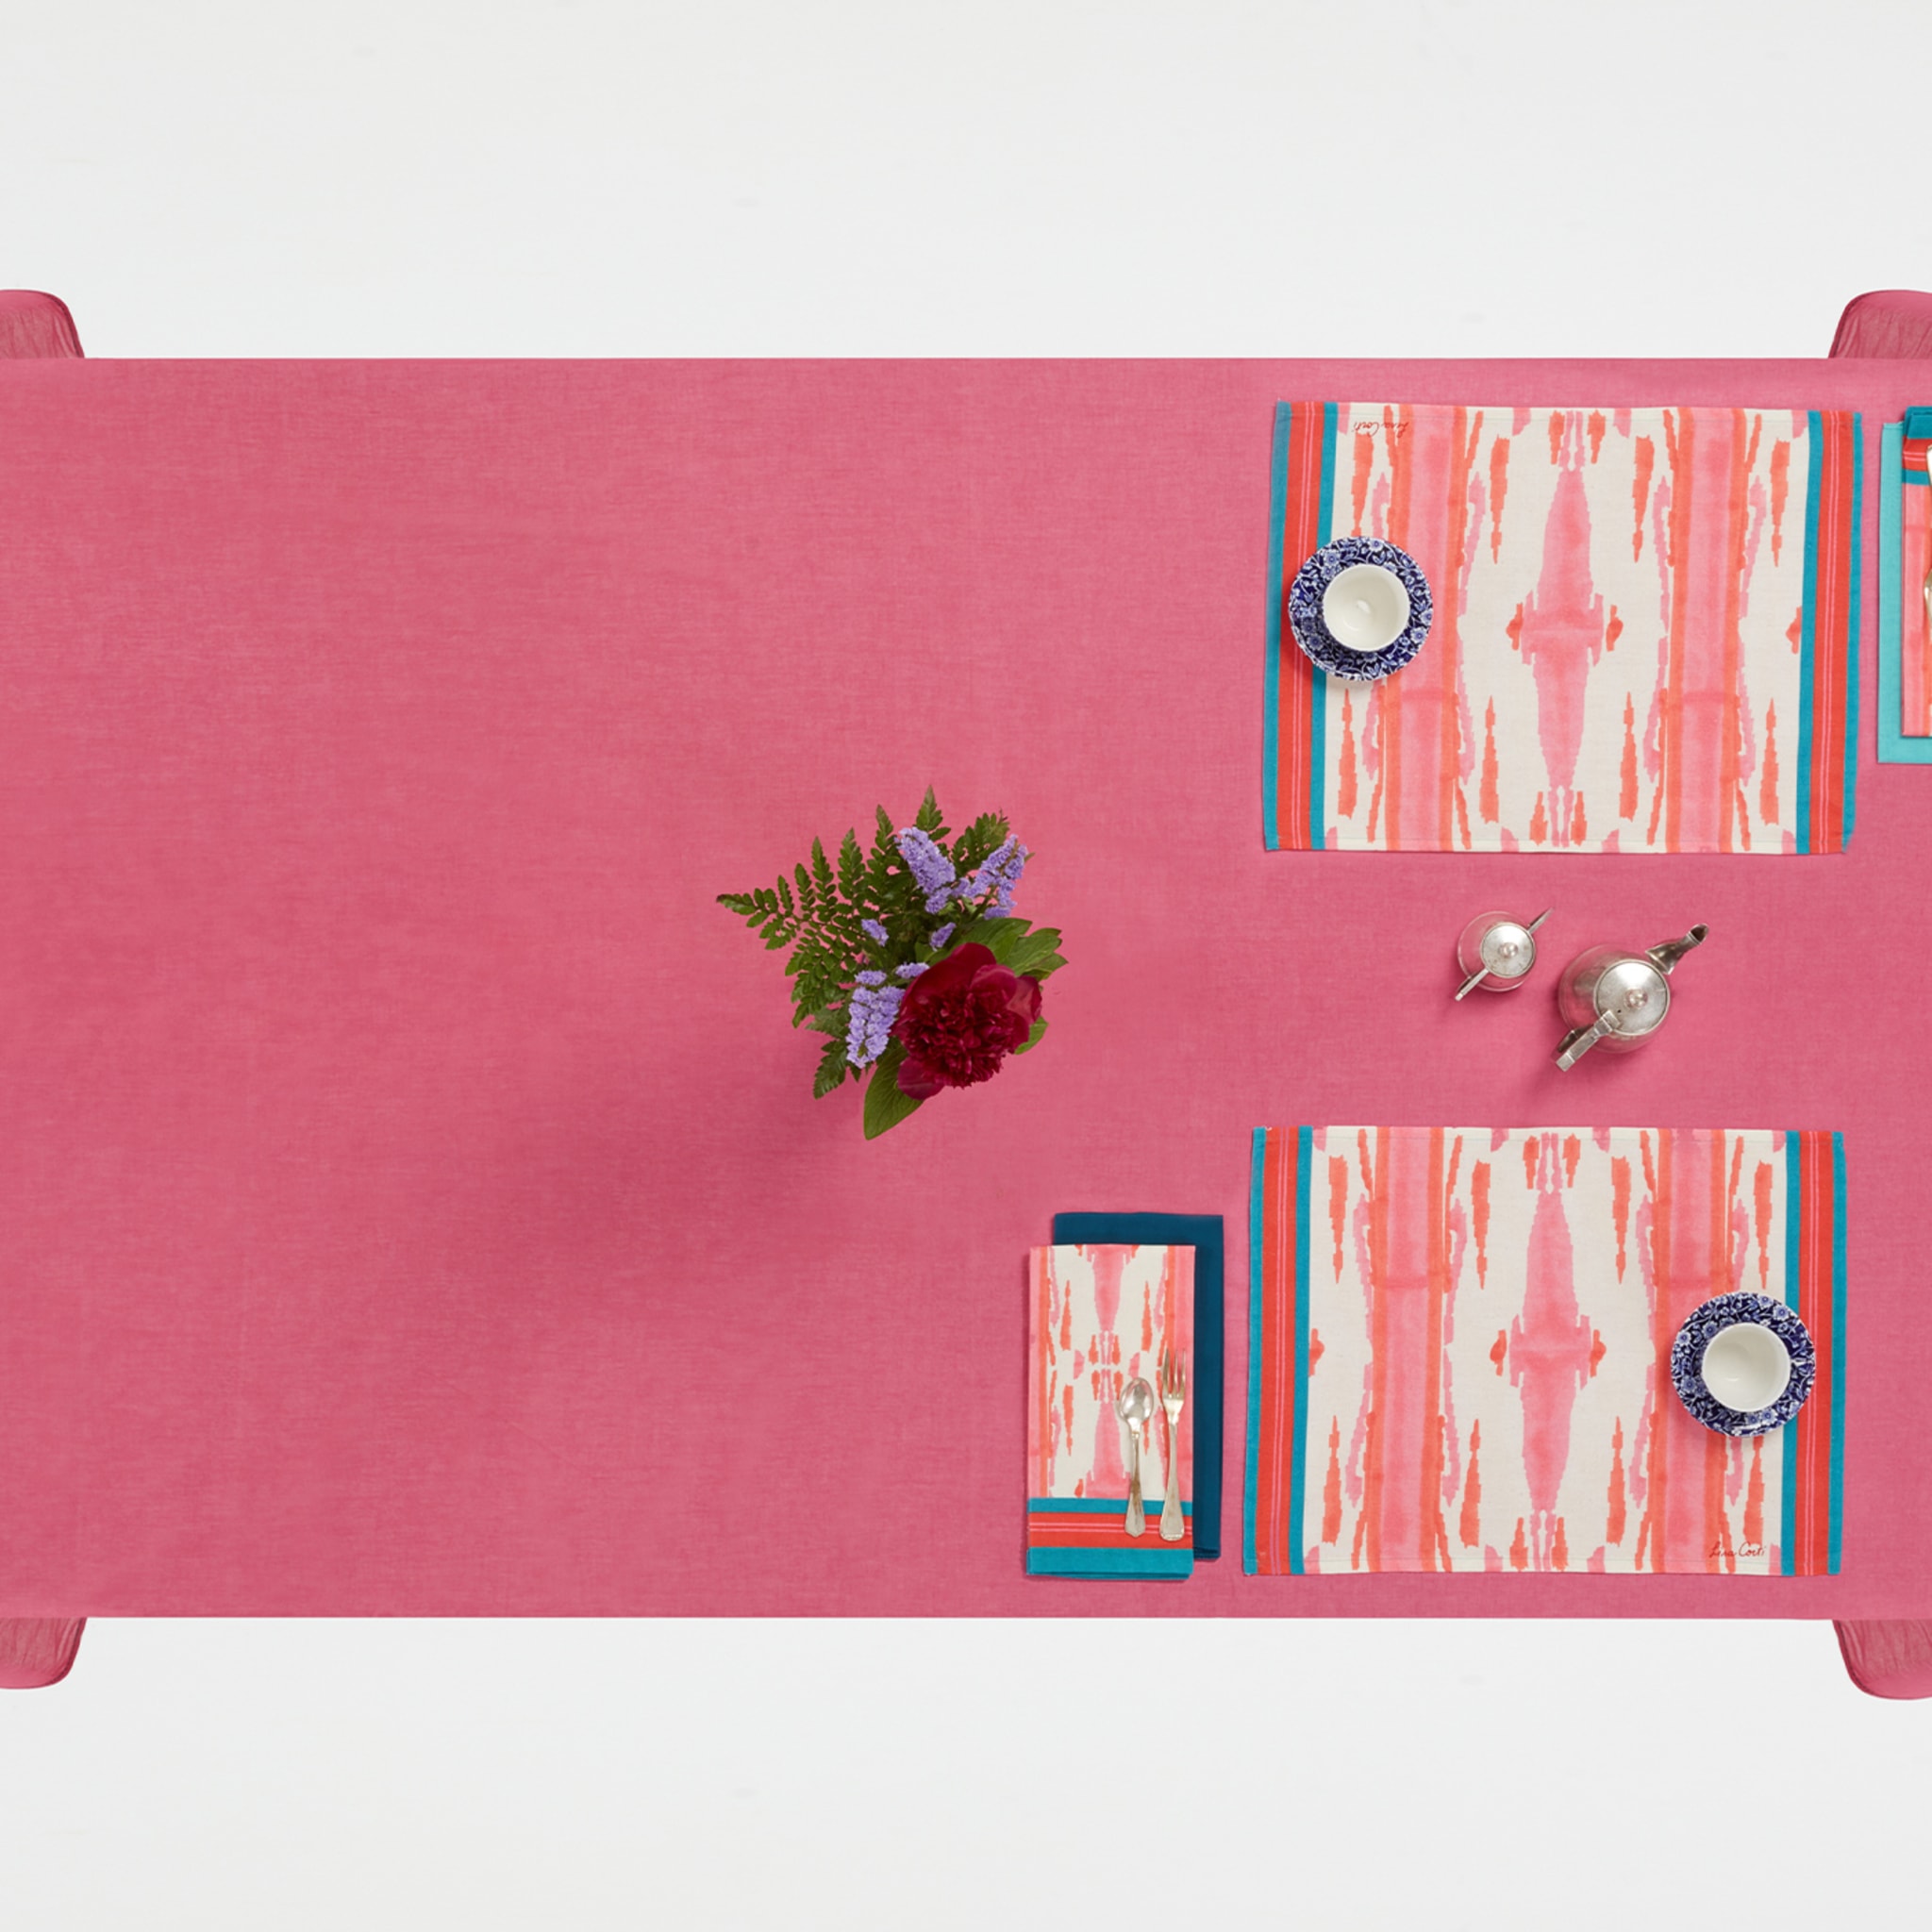 Flame Design Pink Set of 4 Multicolor Placemats - Alternative view 1